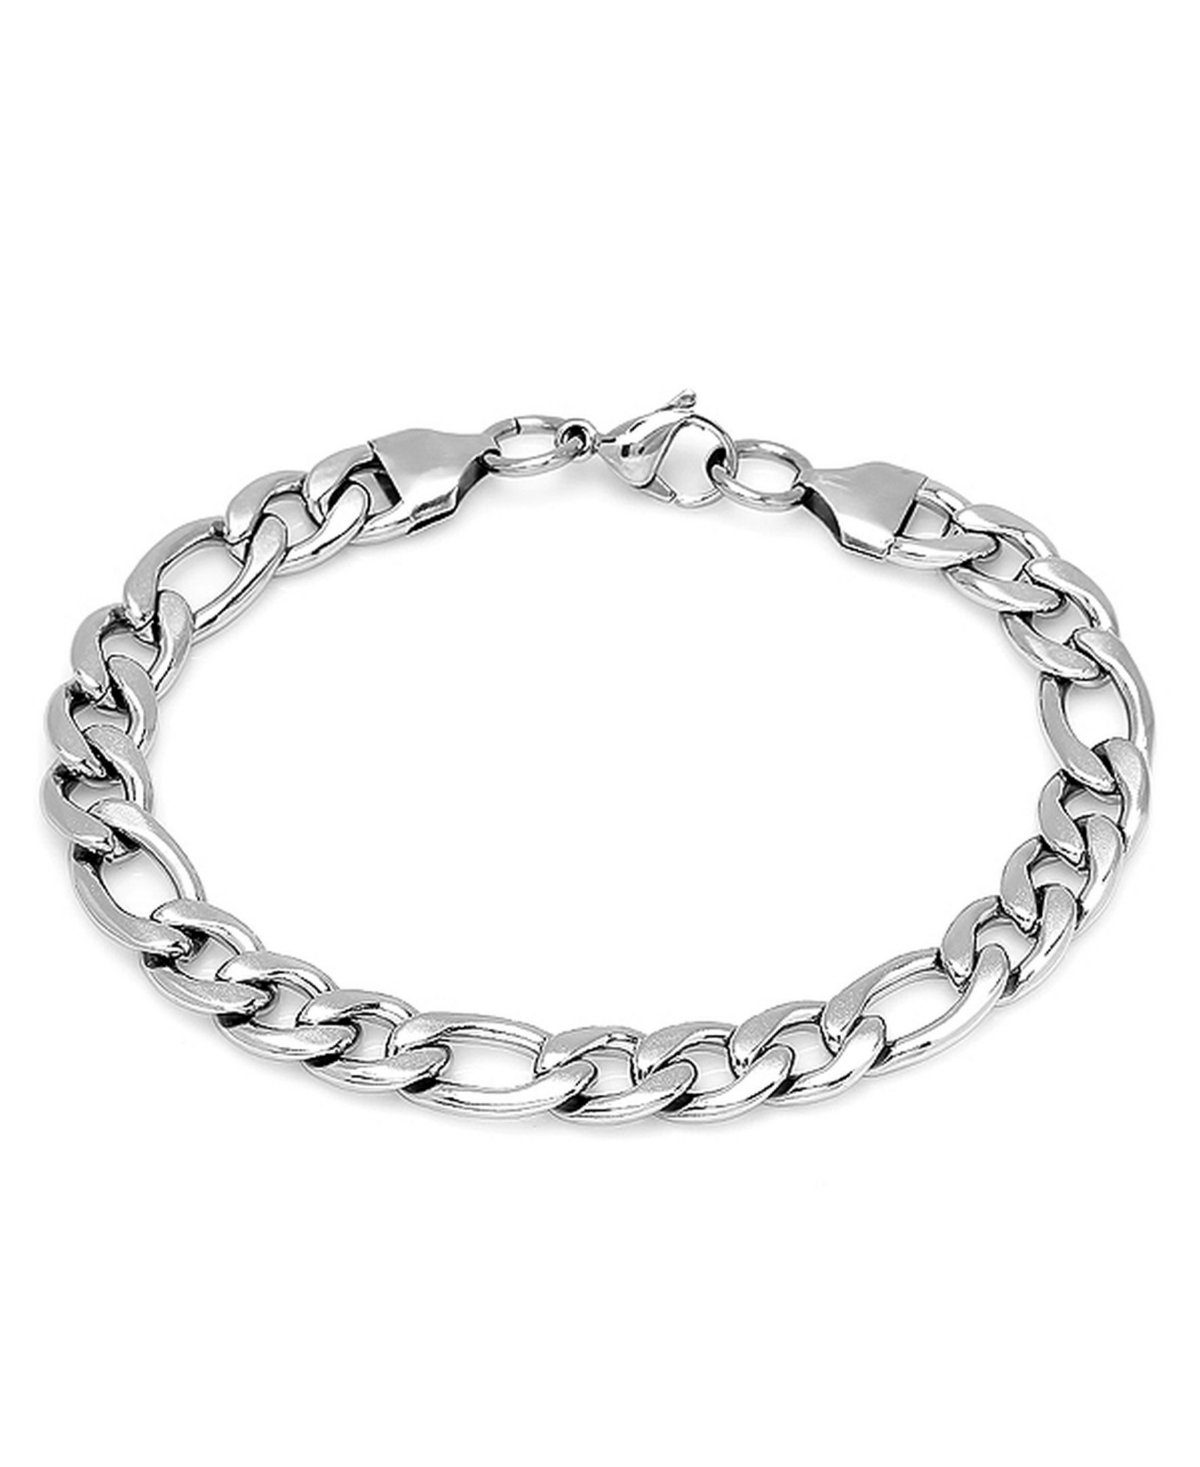 Men's Stainless Steel Thick Round Box Link Bracelet - Silver